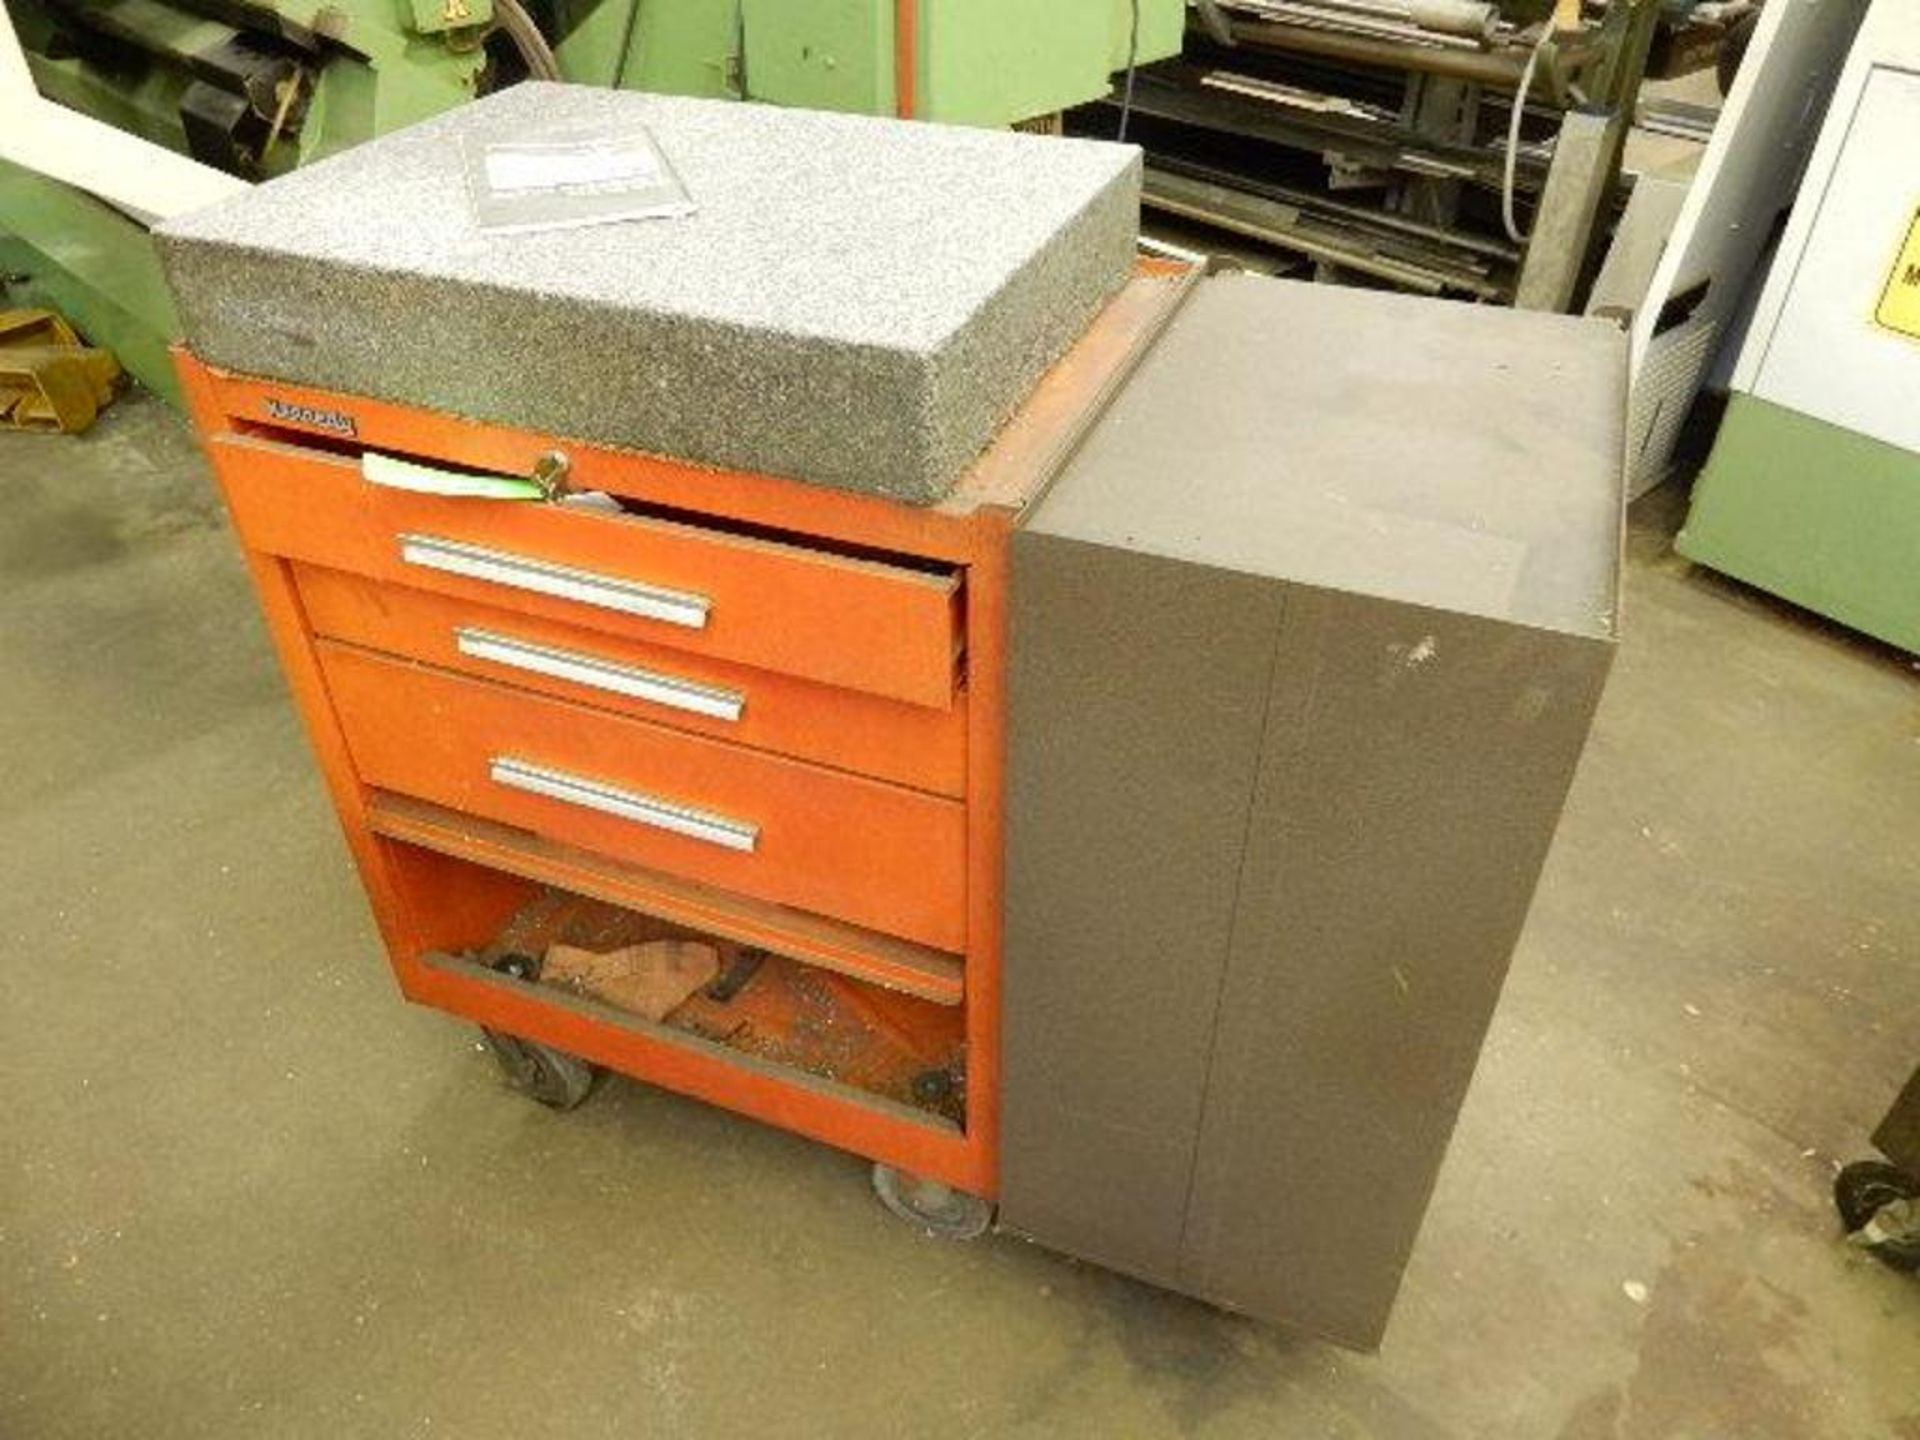 Kennedy Tool Box, with 18" x 24" x 4" Granite Surface Plate